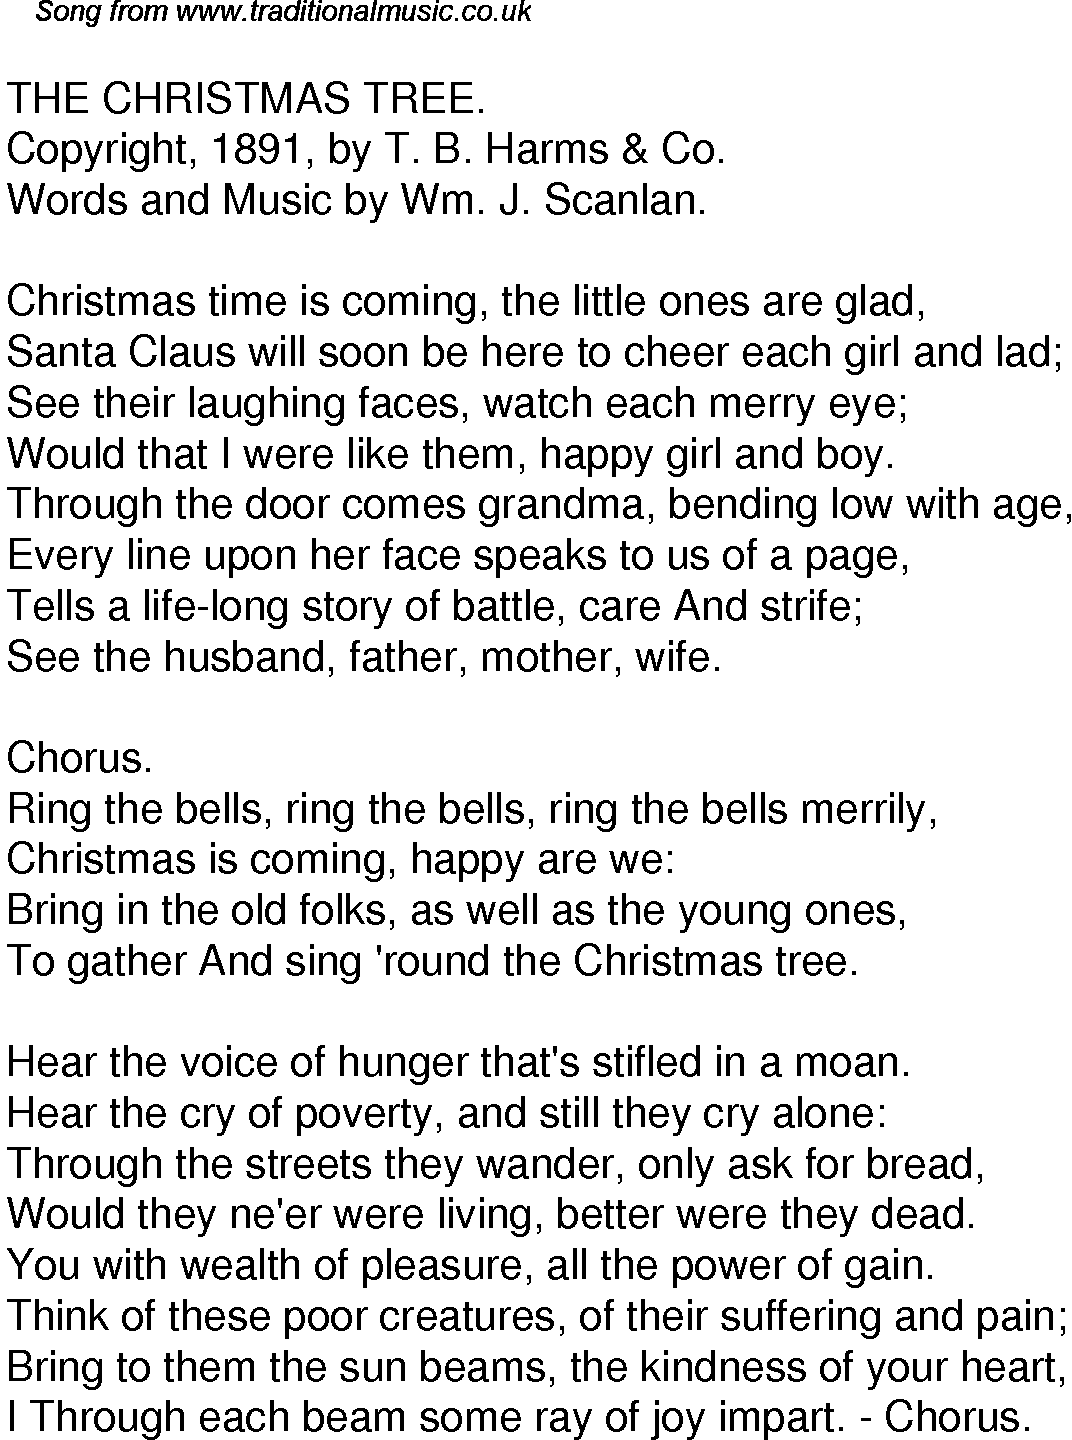 Old Time Song Lyrics for 49 The Christmas Tree